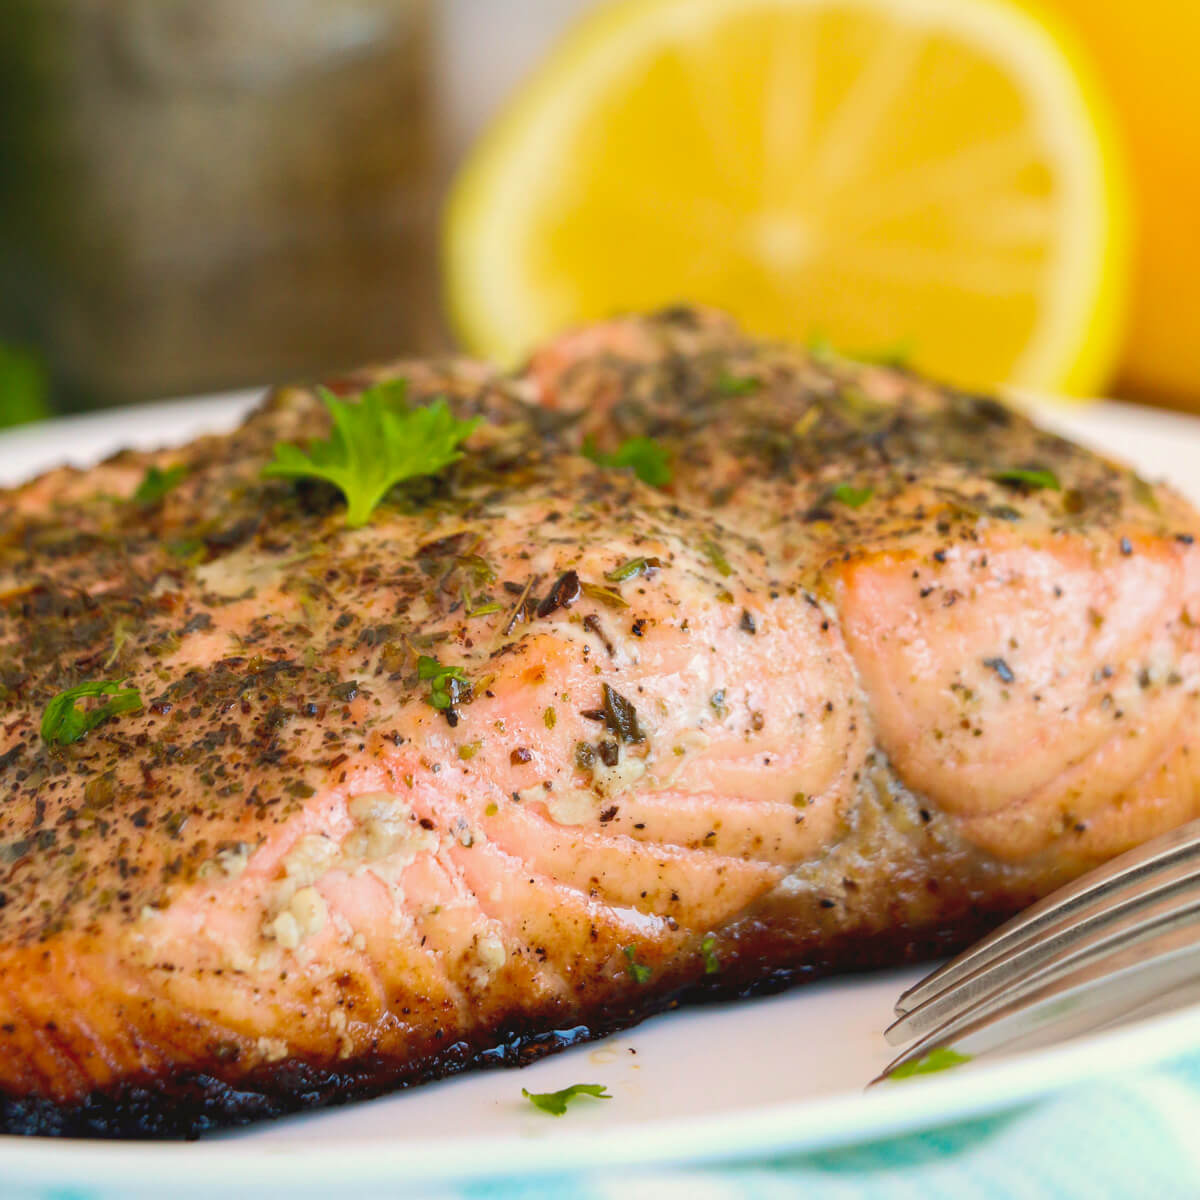 A perfectly cooked skin on cast iron salmon with lemon and herbs on a plate.